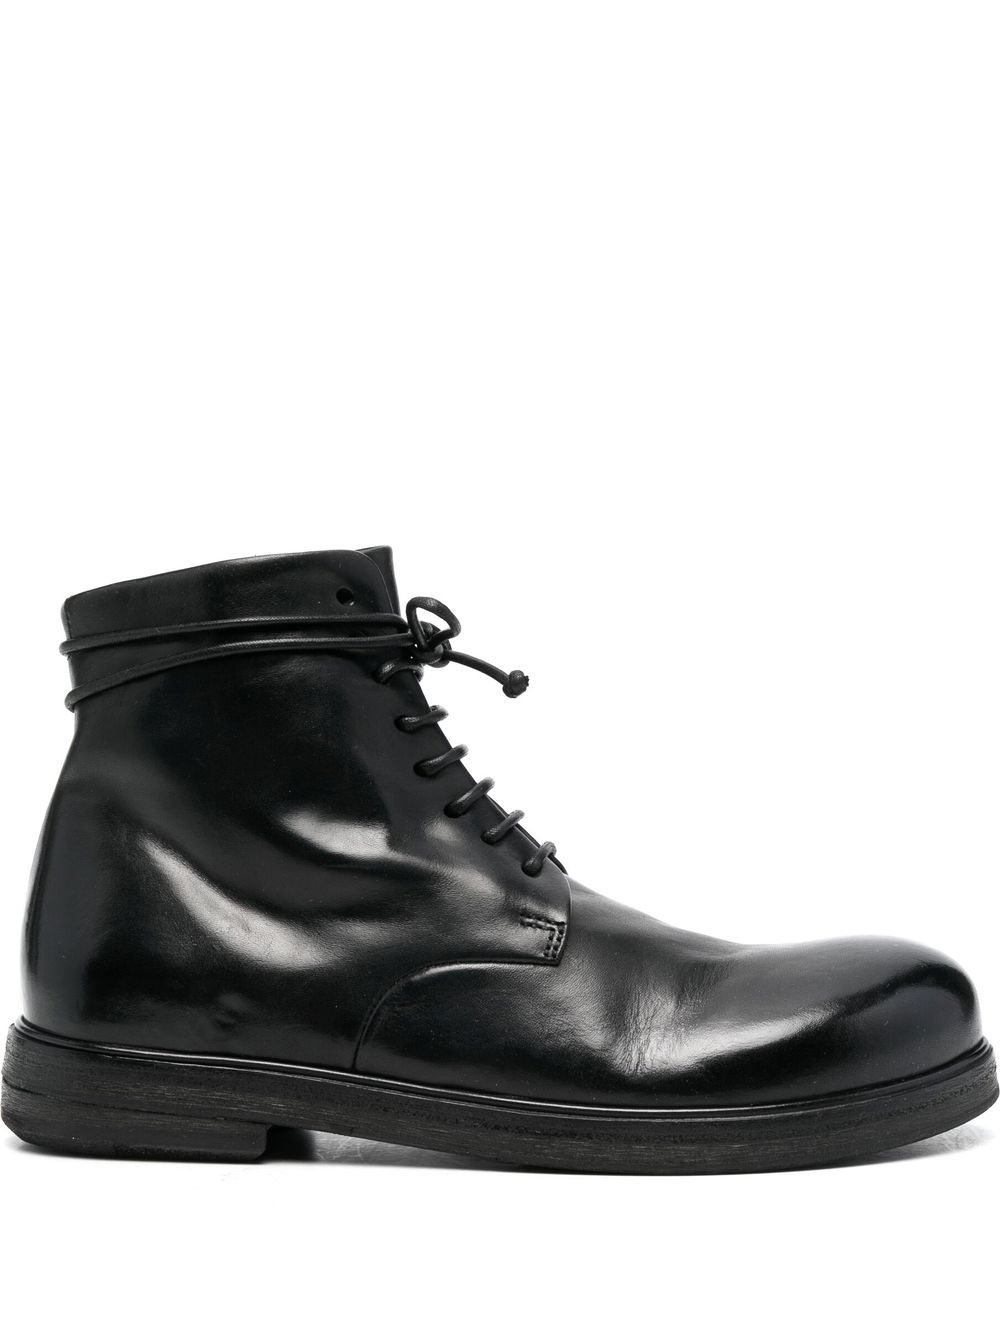 Marsèll polished-leather lace-up boots - Black von Marsèll